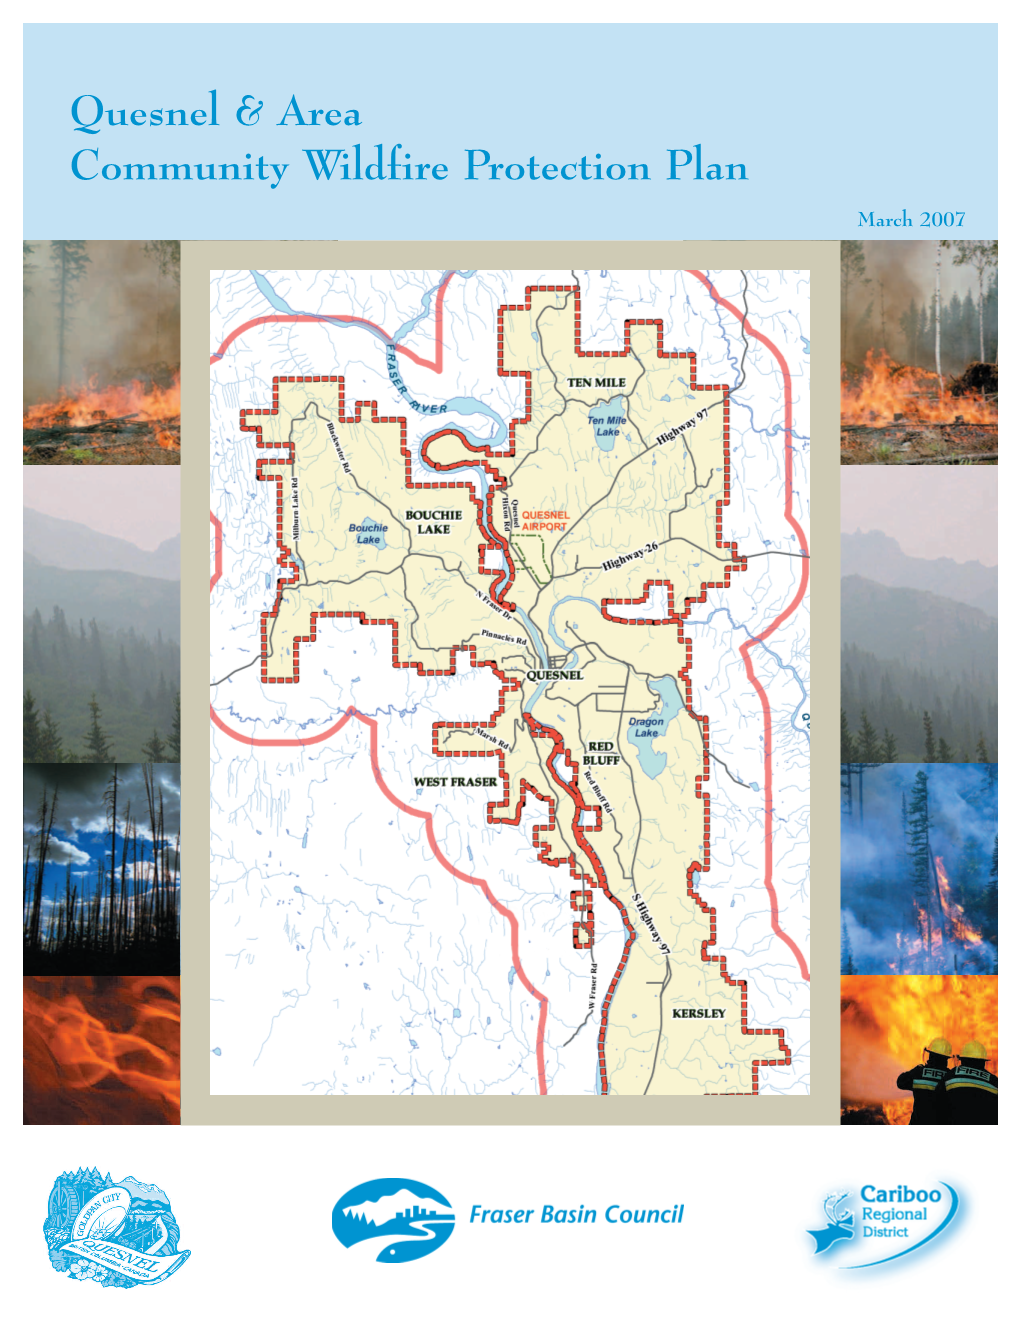 Quesnel & Area Community Wildfire Protection Plan